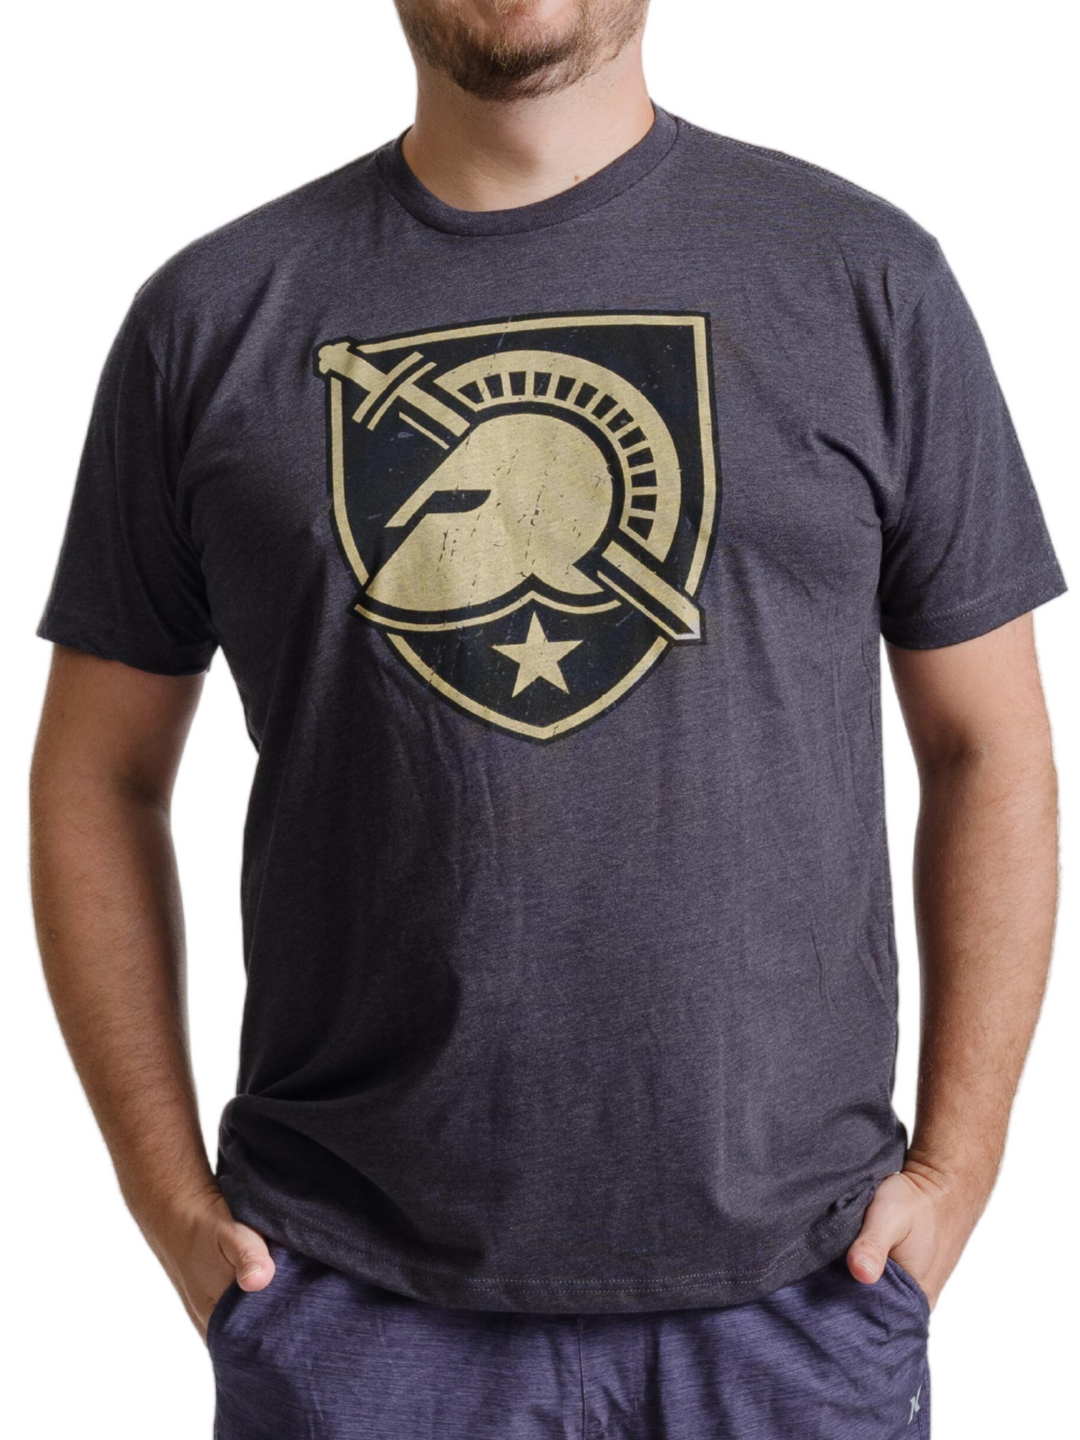 West Point Army Shirt Super Soft and High Quality US Military Academy West Point Army Shield T-shirt